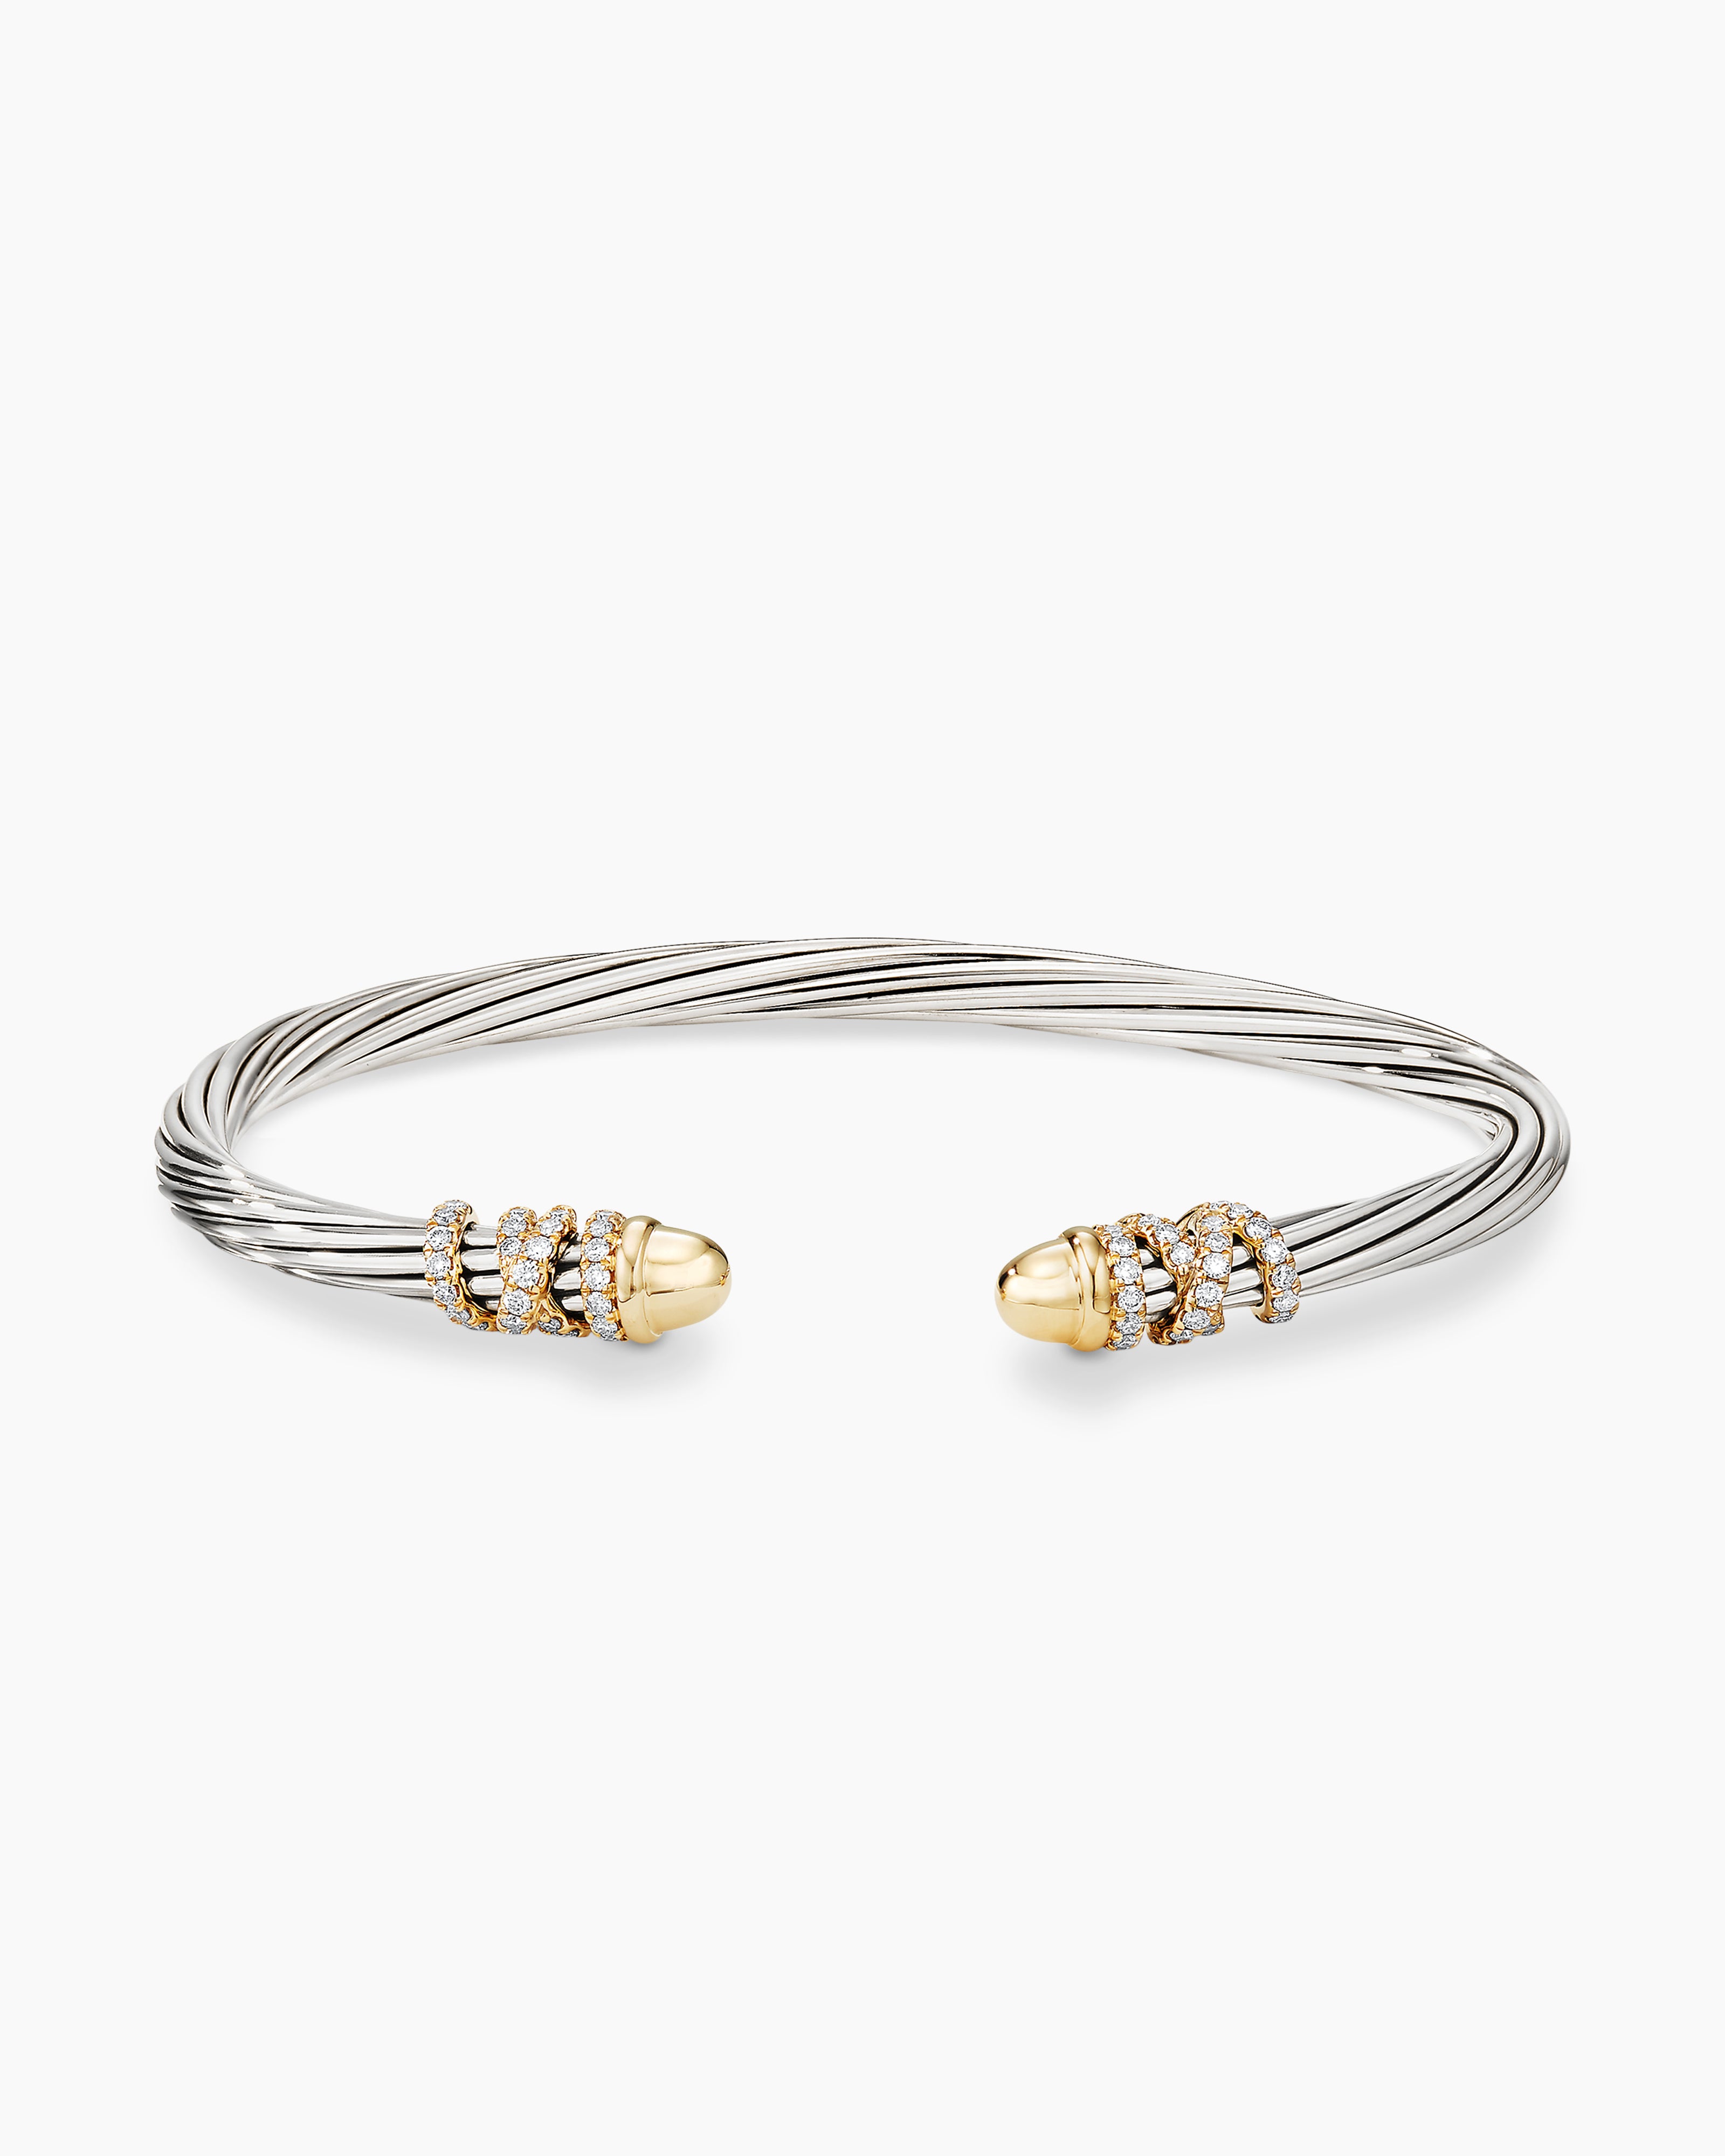 David Yurman Stax Single Row Faceted Bracelet with Diamonds in 18k Gold |  Lee Michaels Fine Jewelry stores